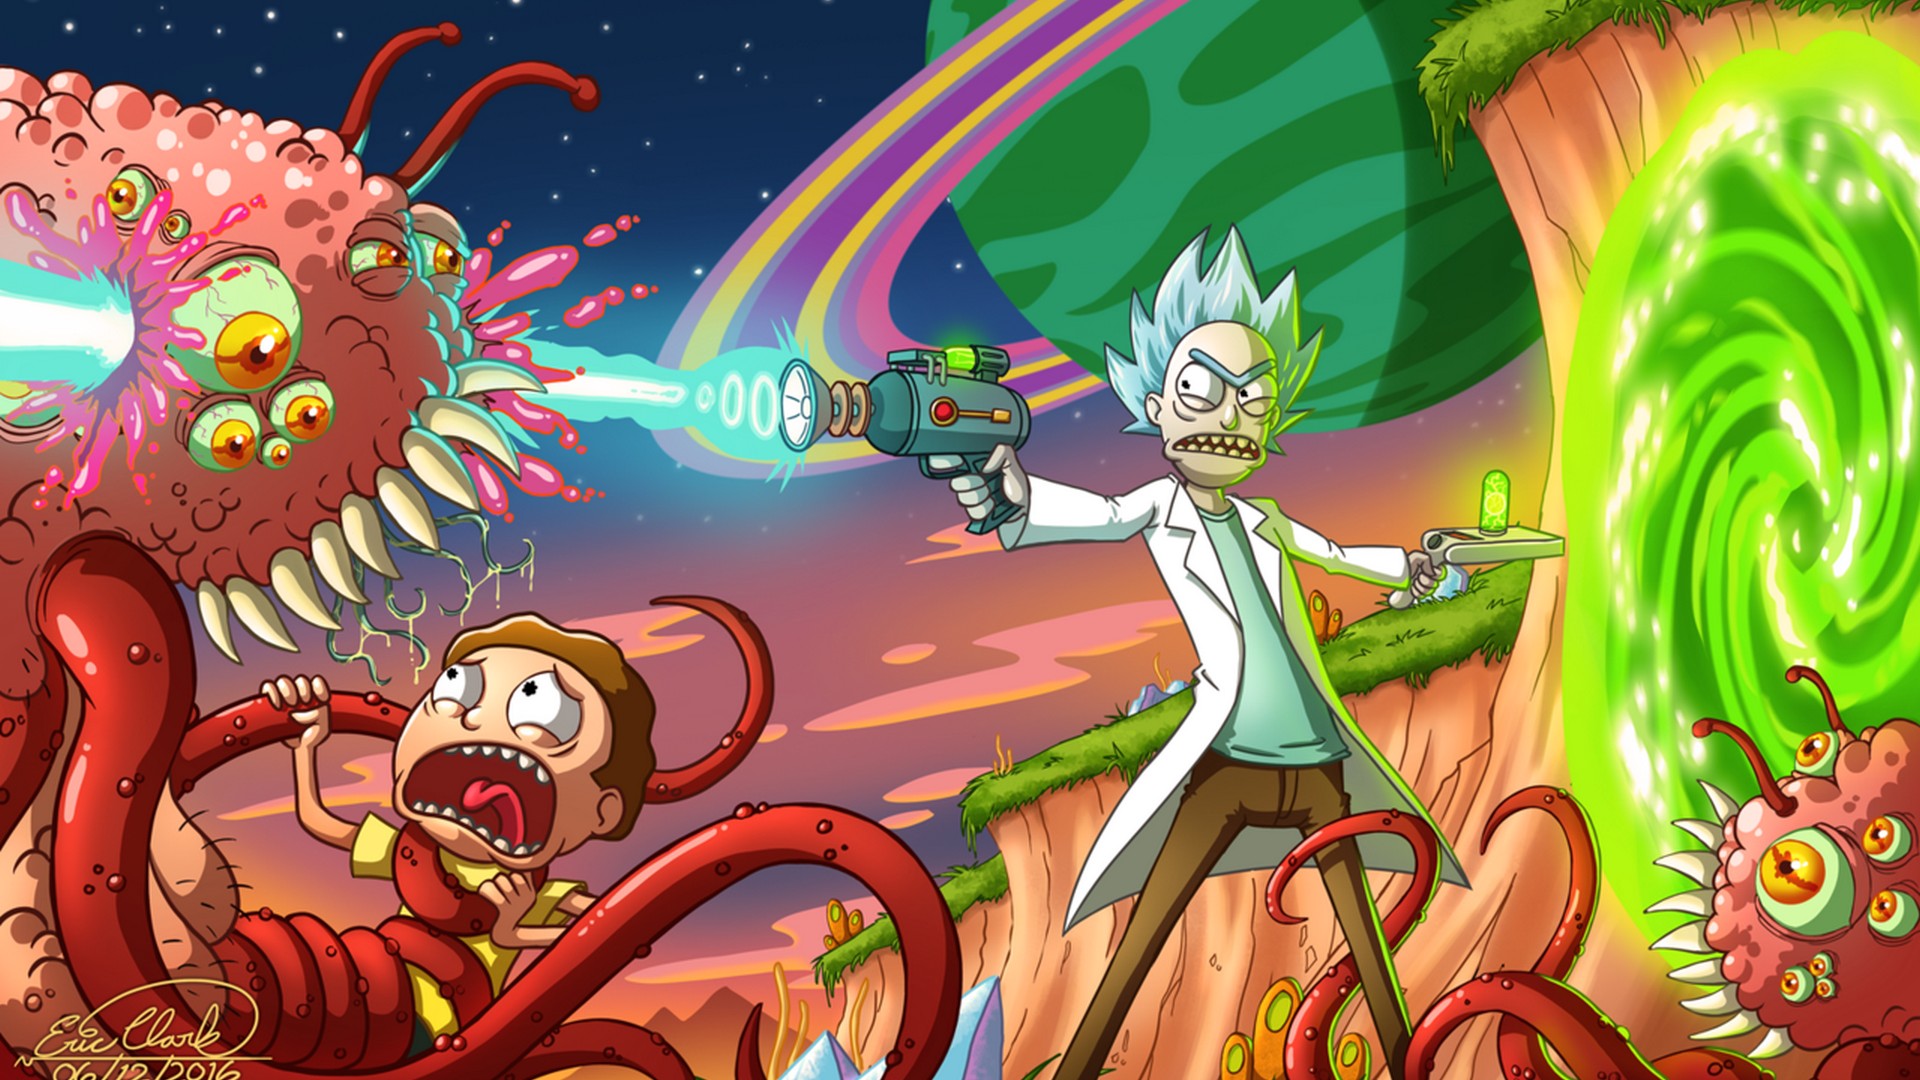 Wallpaper Rick and Morty Art with resolution 1920X1080 pixel. You can use this wallpaper as background for your desktop Computer Screensavers, Android or iPhone smartphones